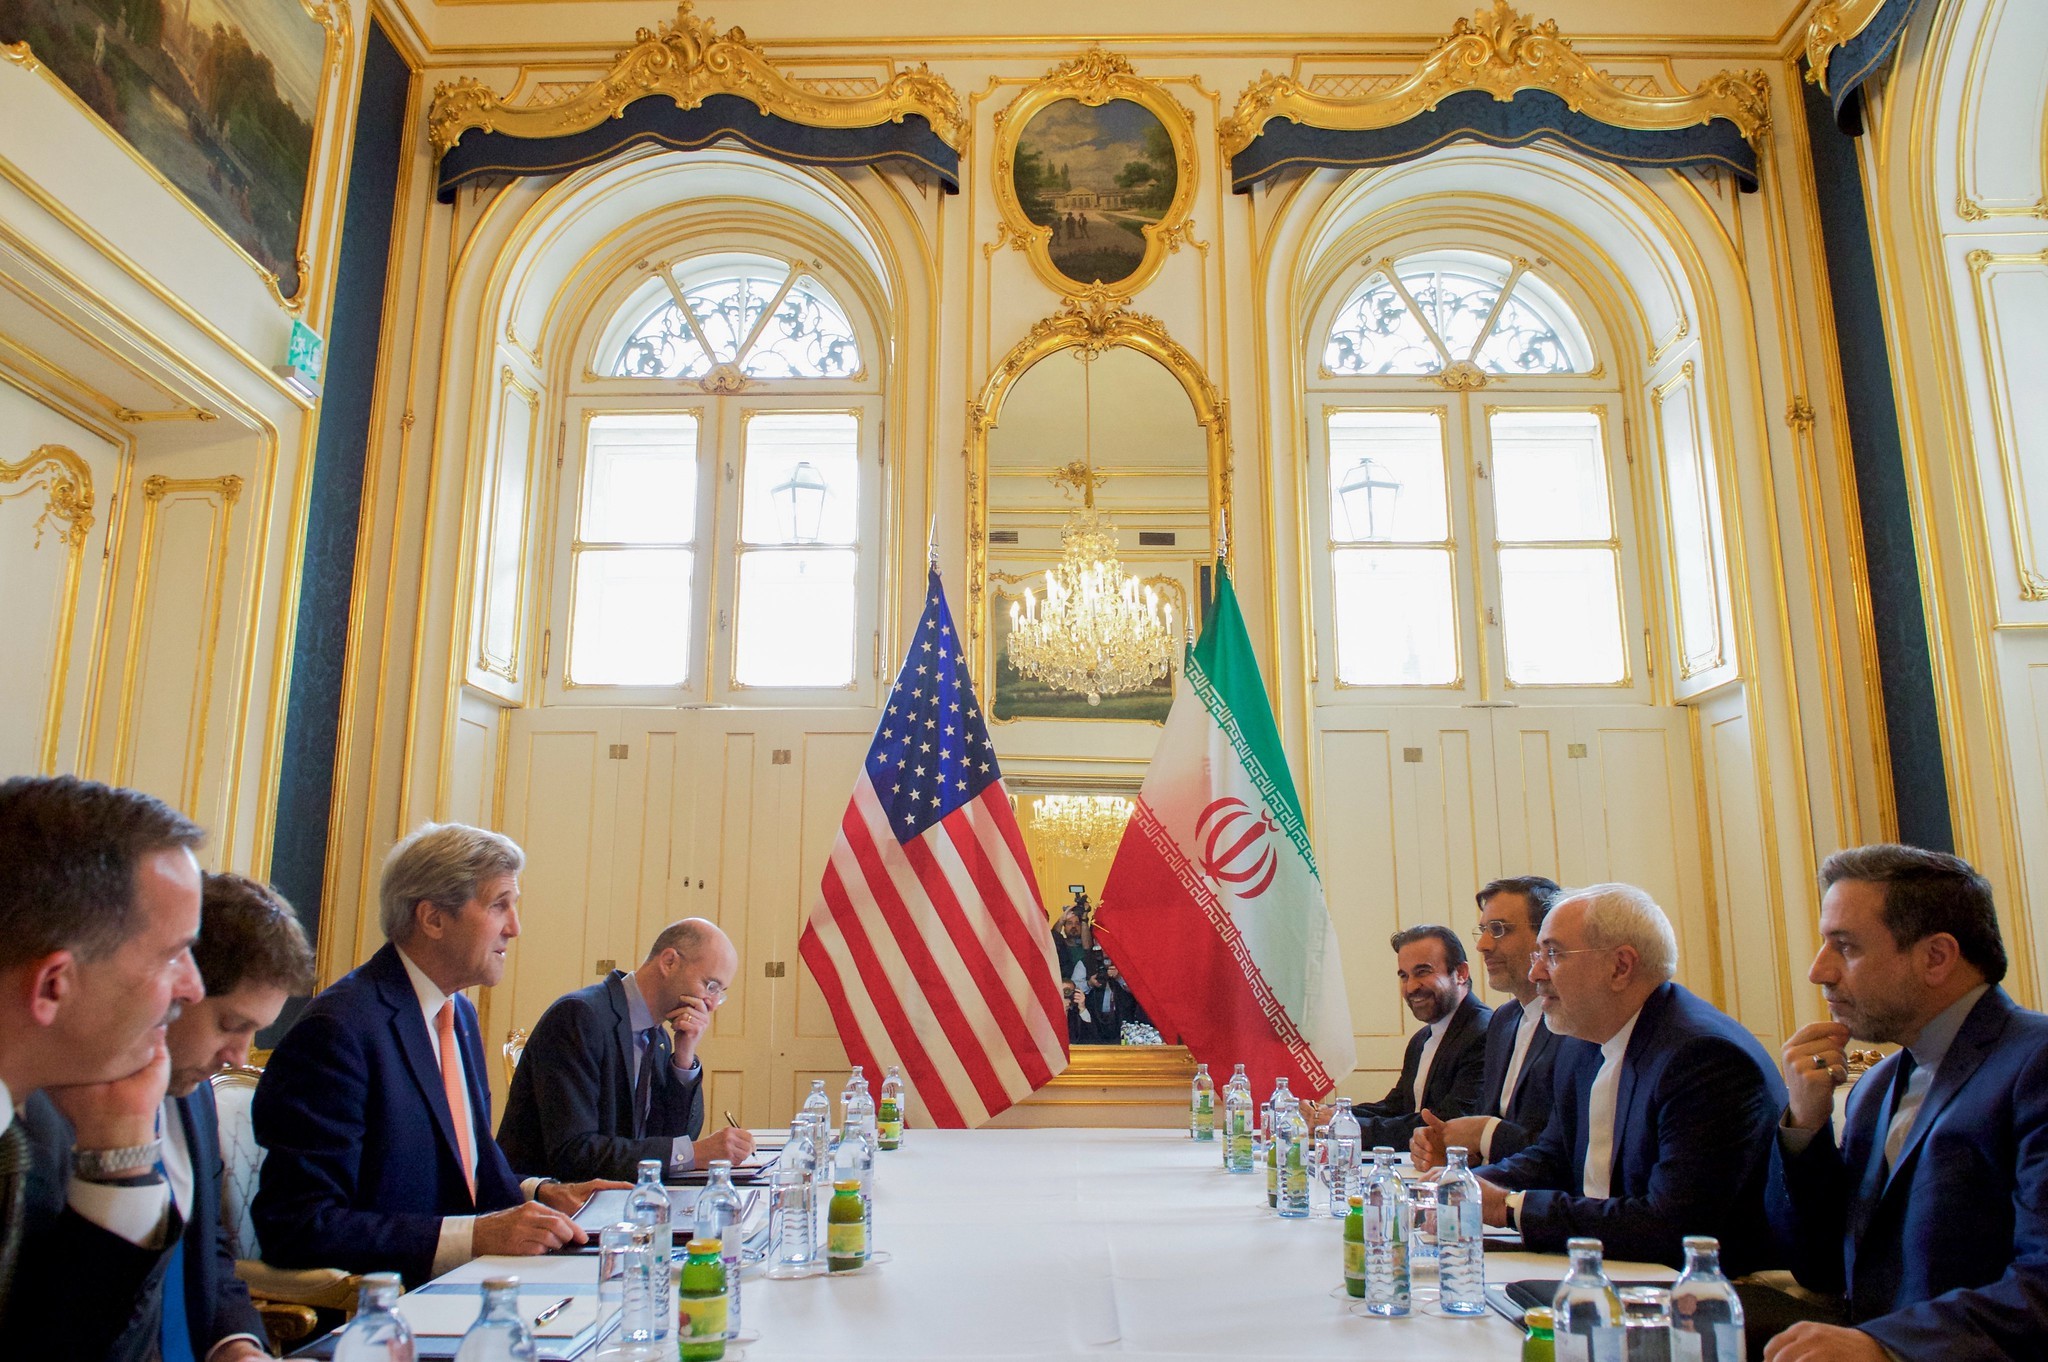 Who Will Make the First Move to Revive the JCPOA?